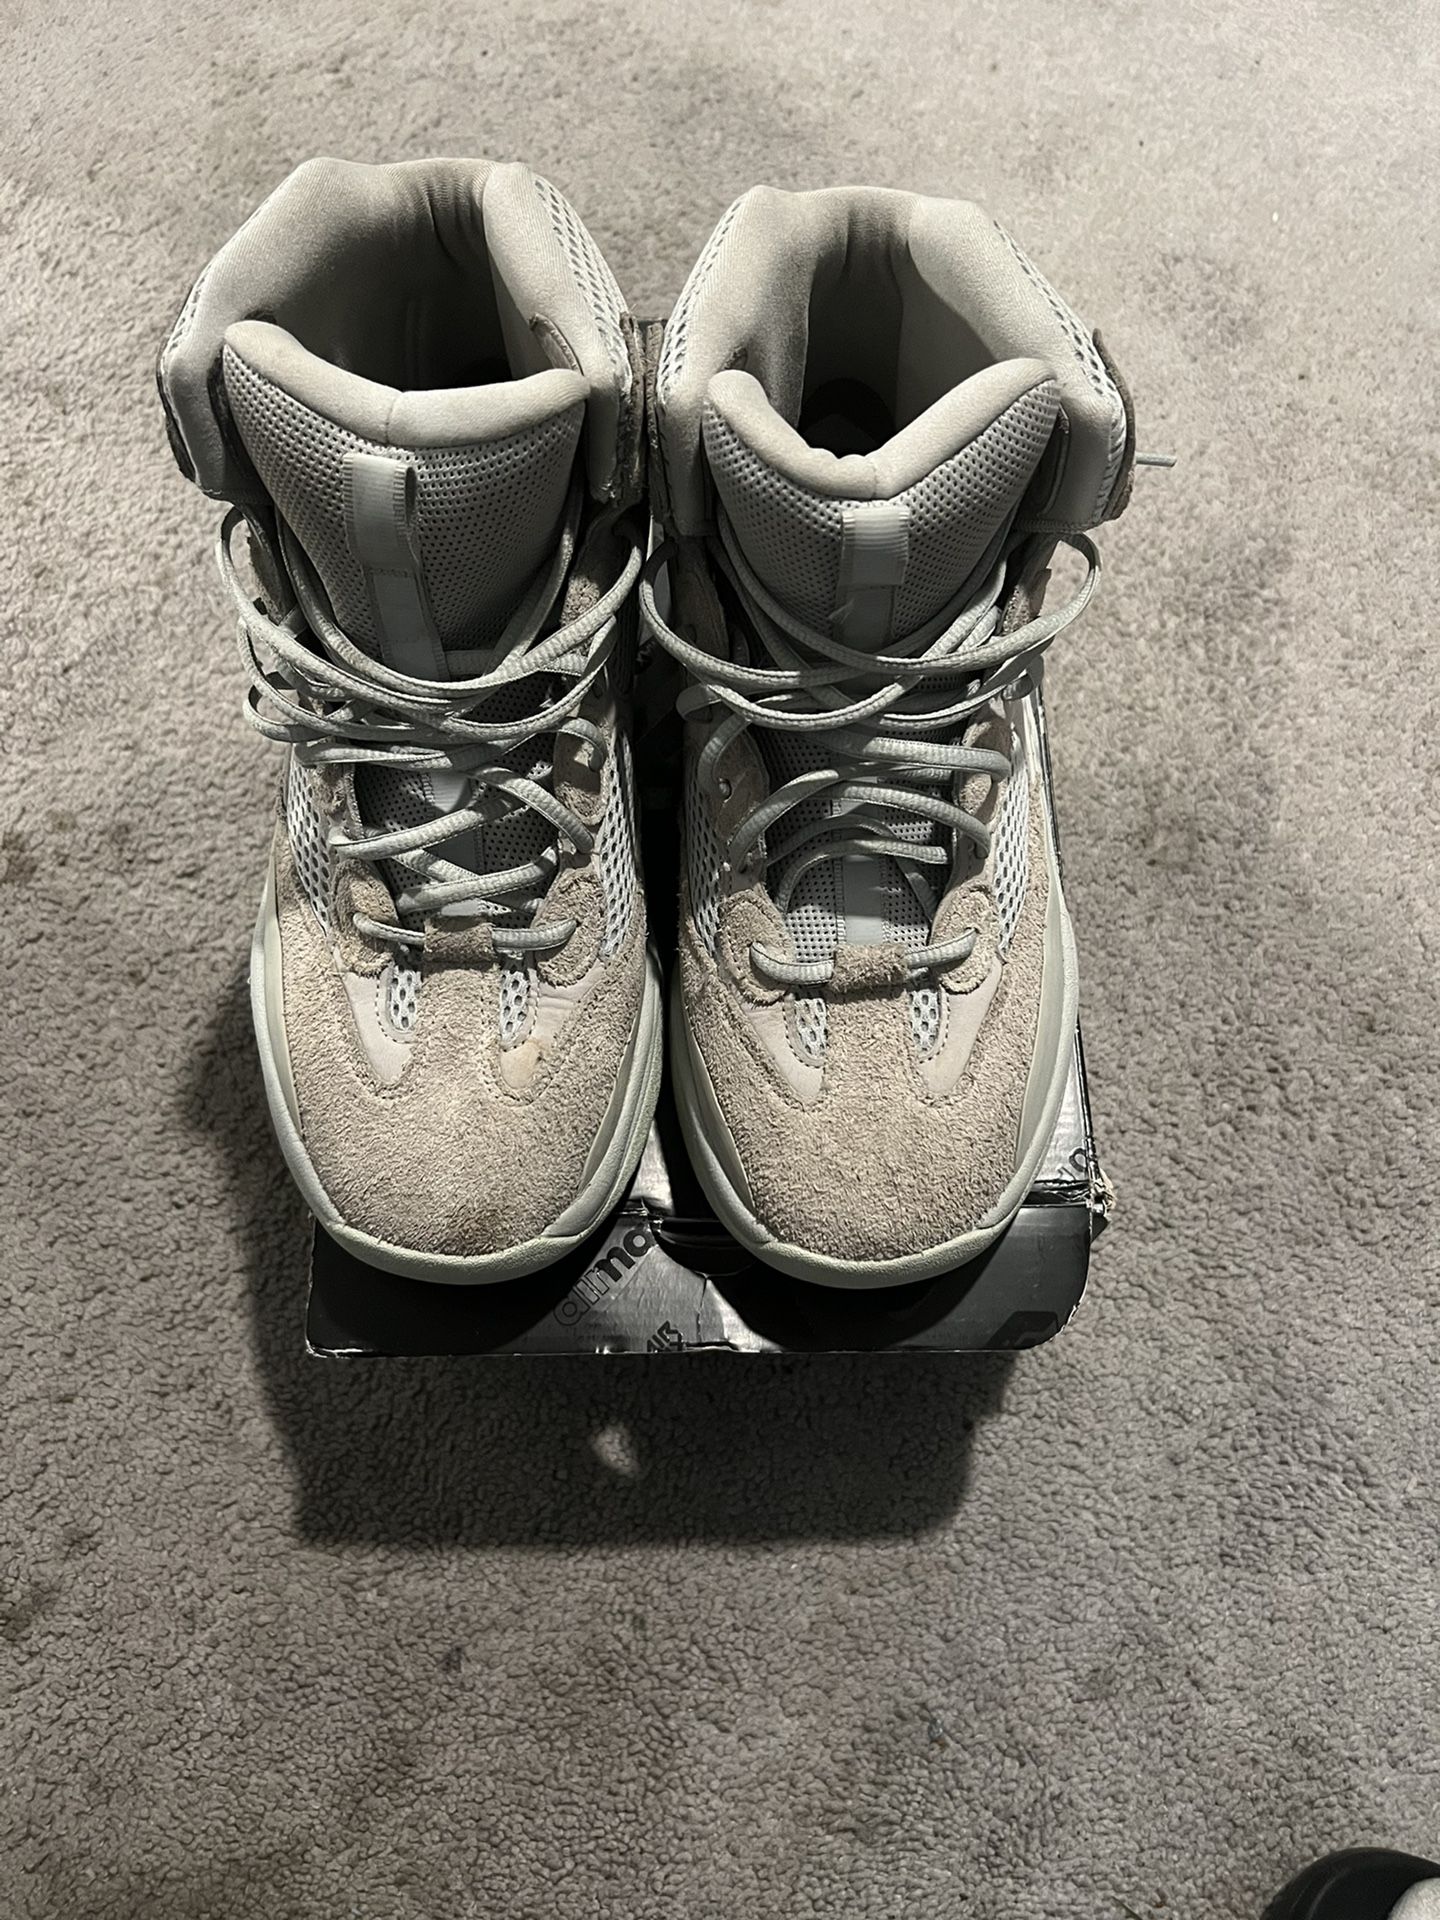 Yeezy Boots  Size 10